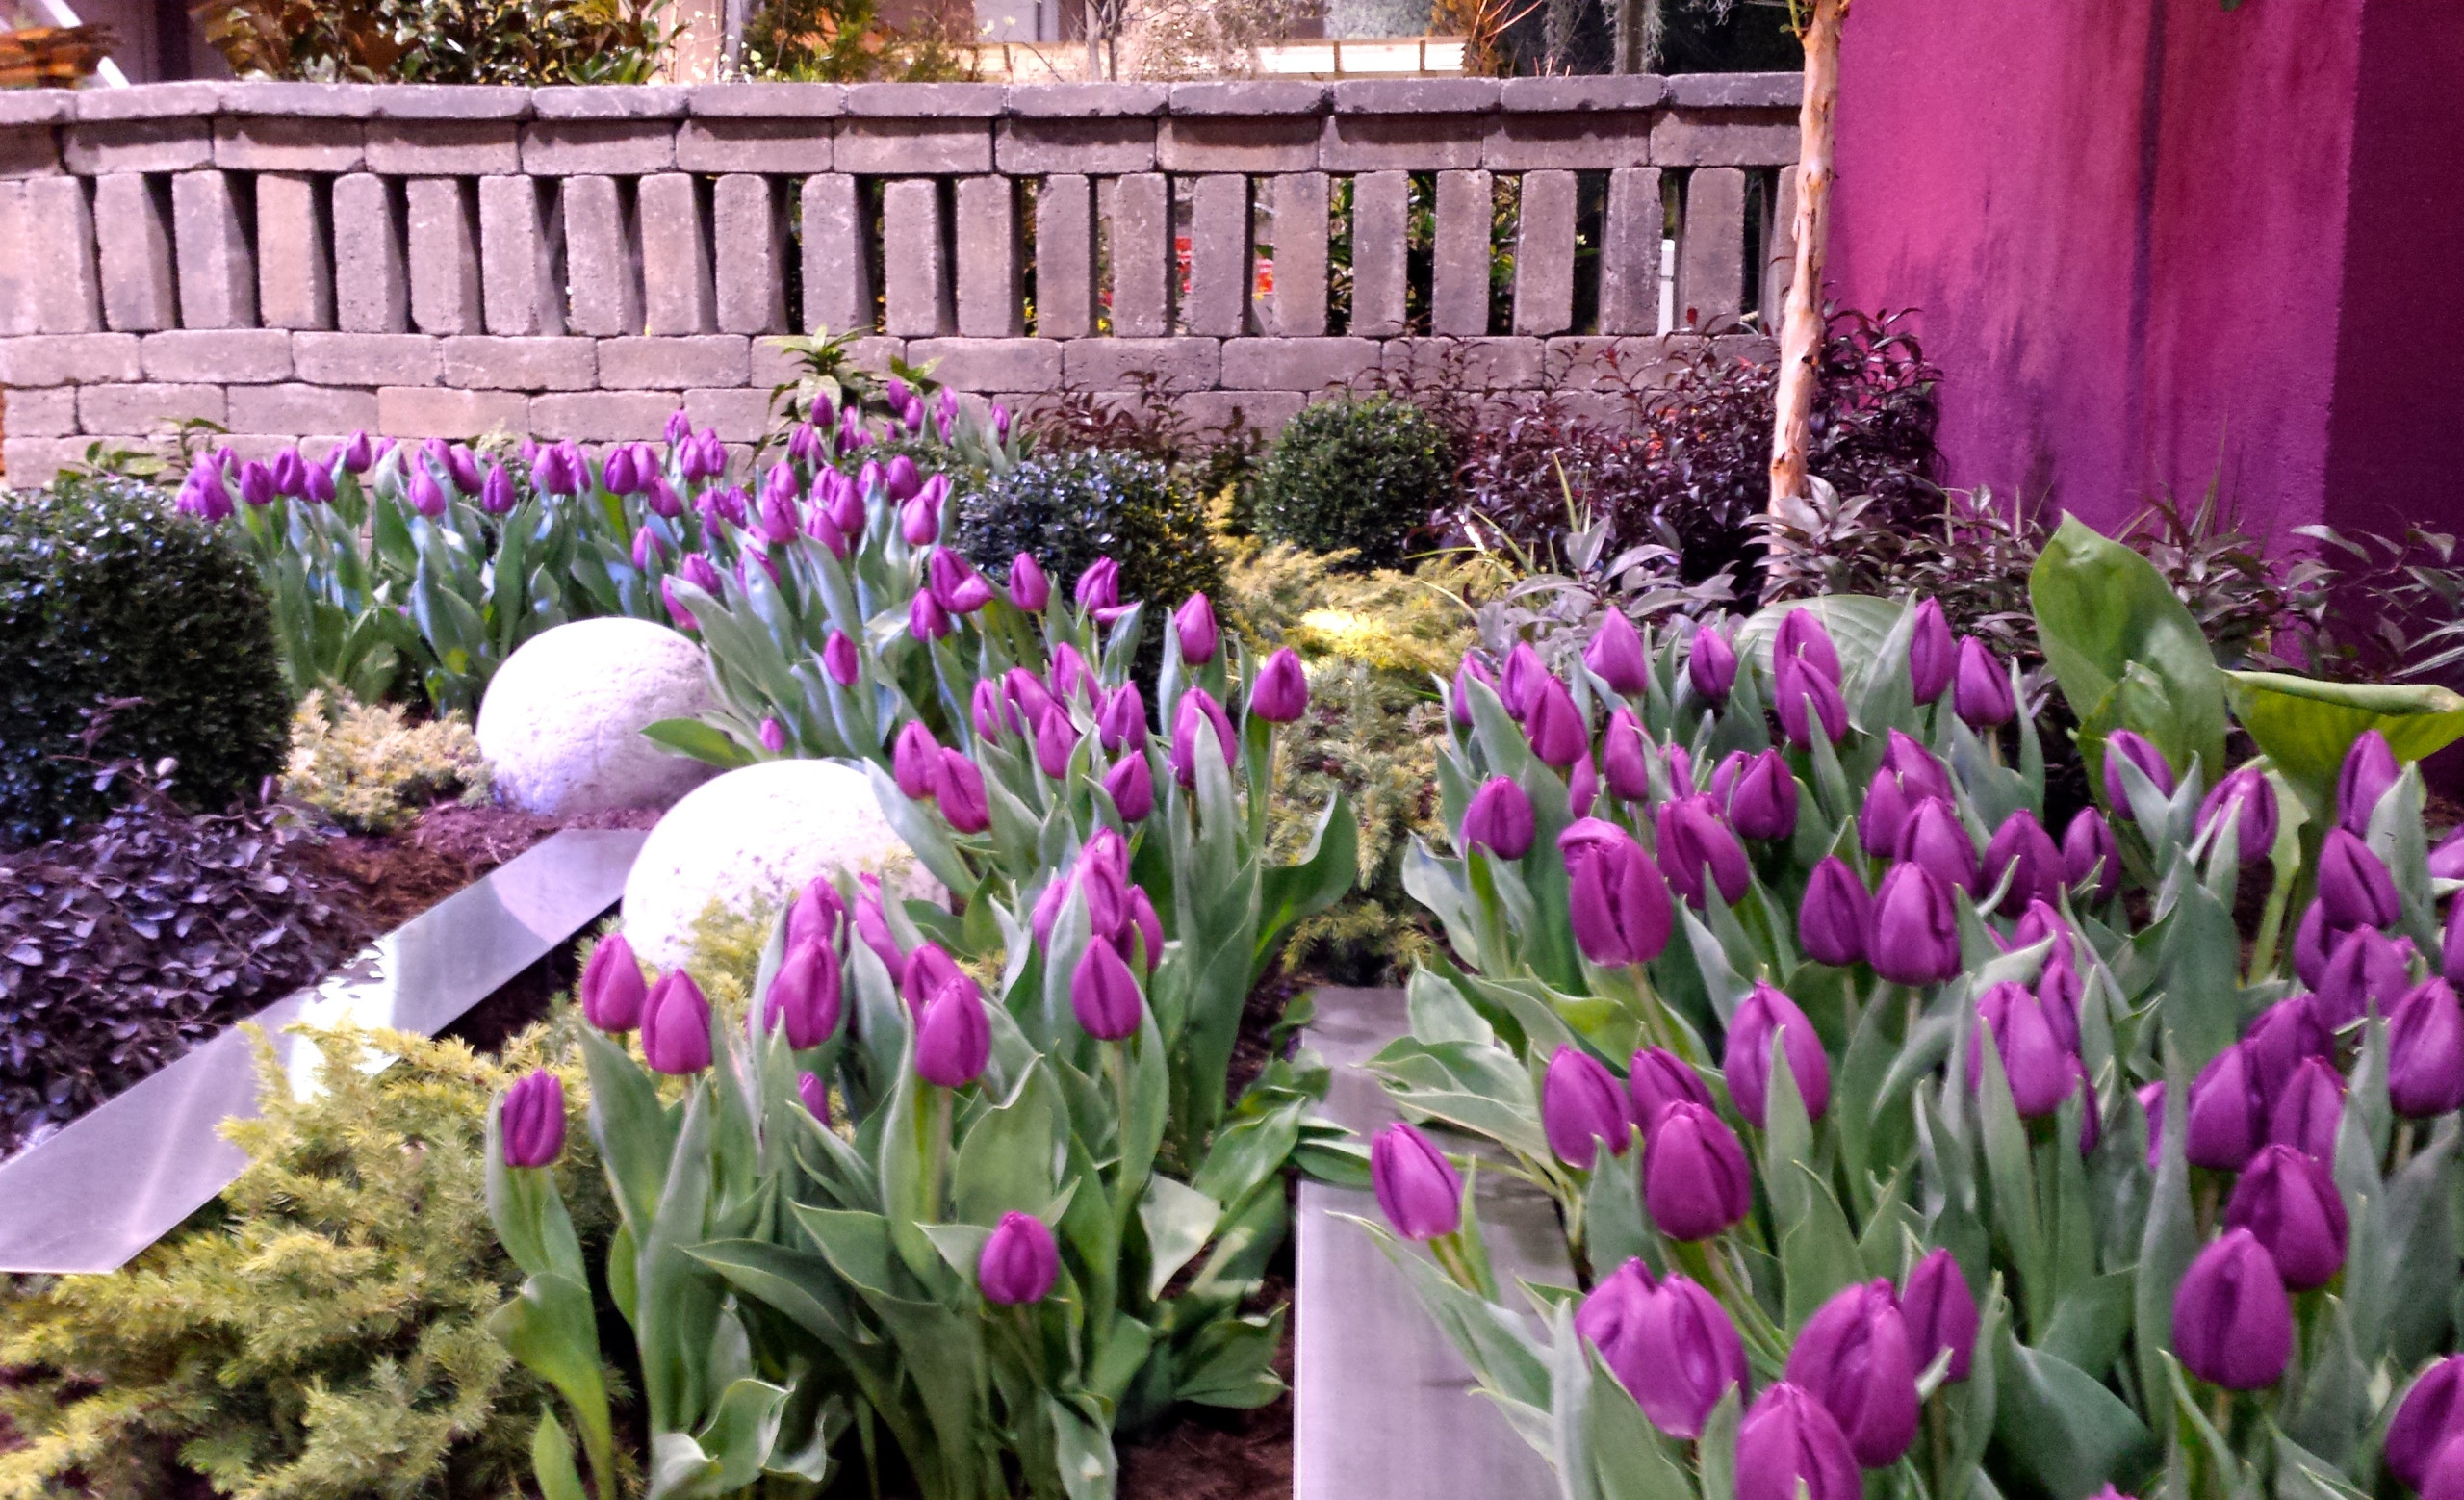 Southern Spring Home and Garden Show Entry 2015